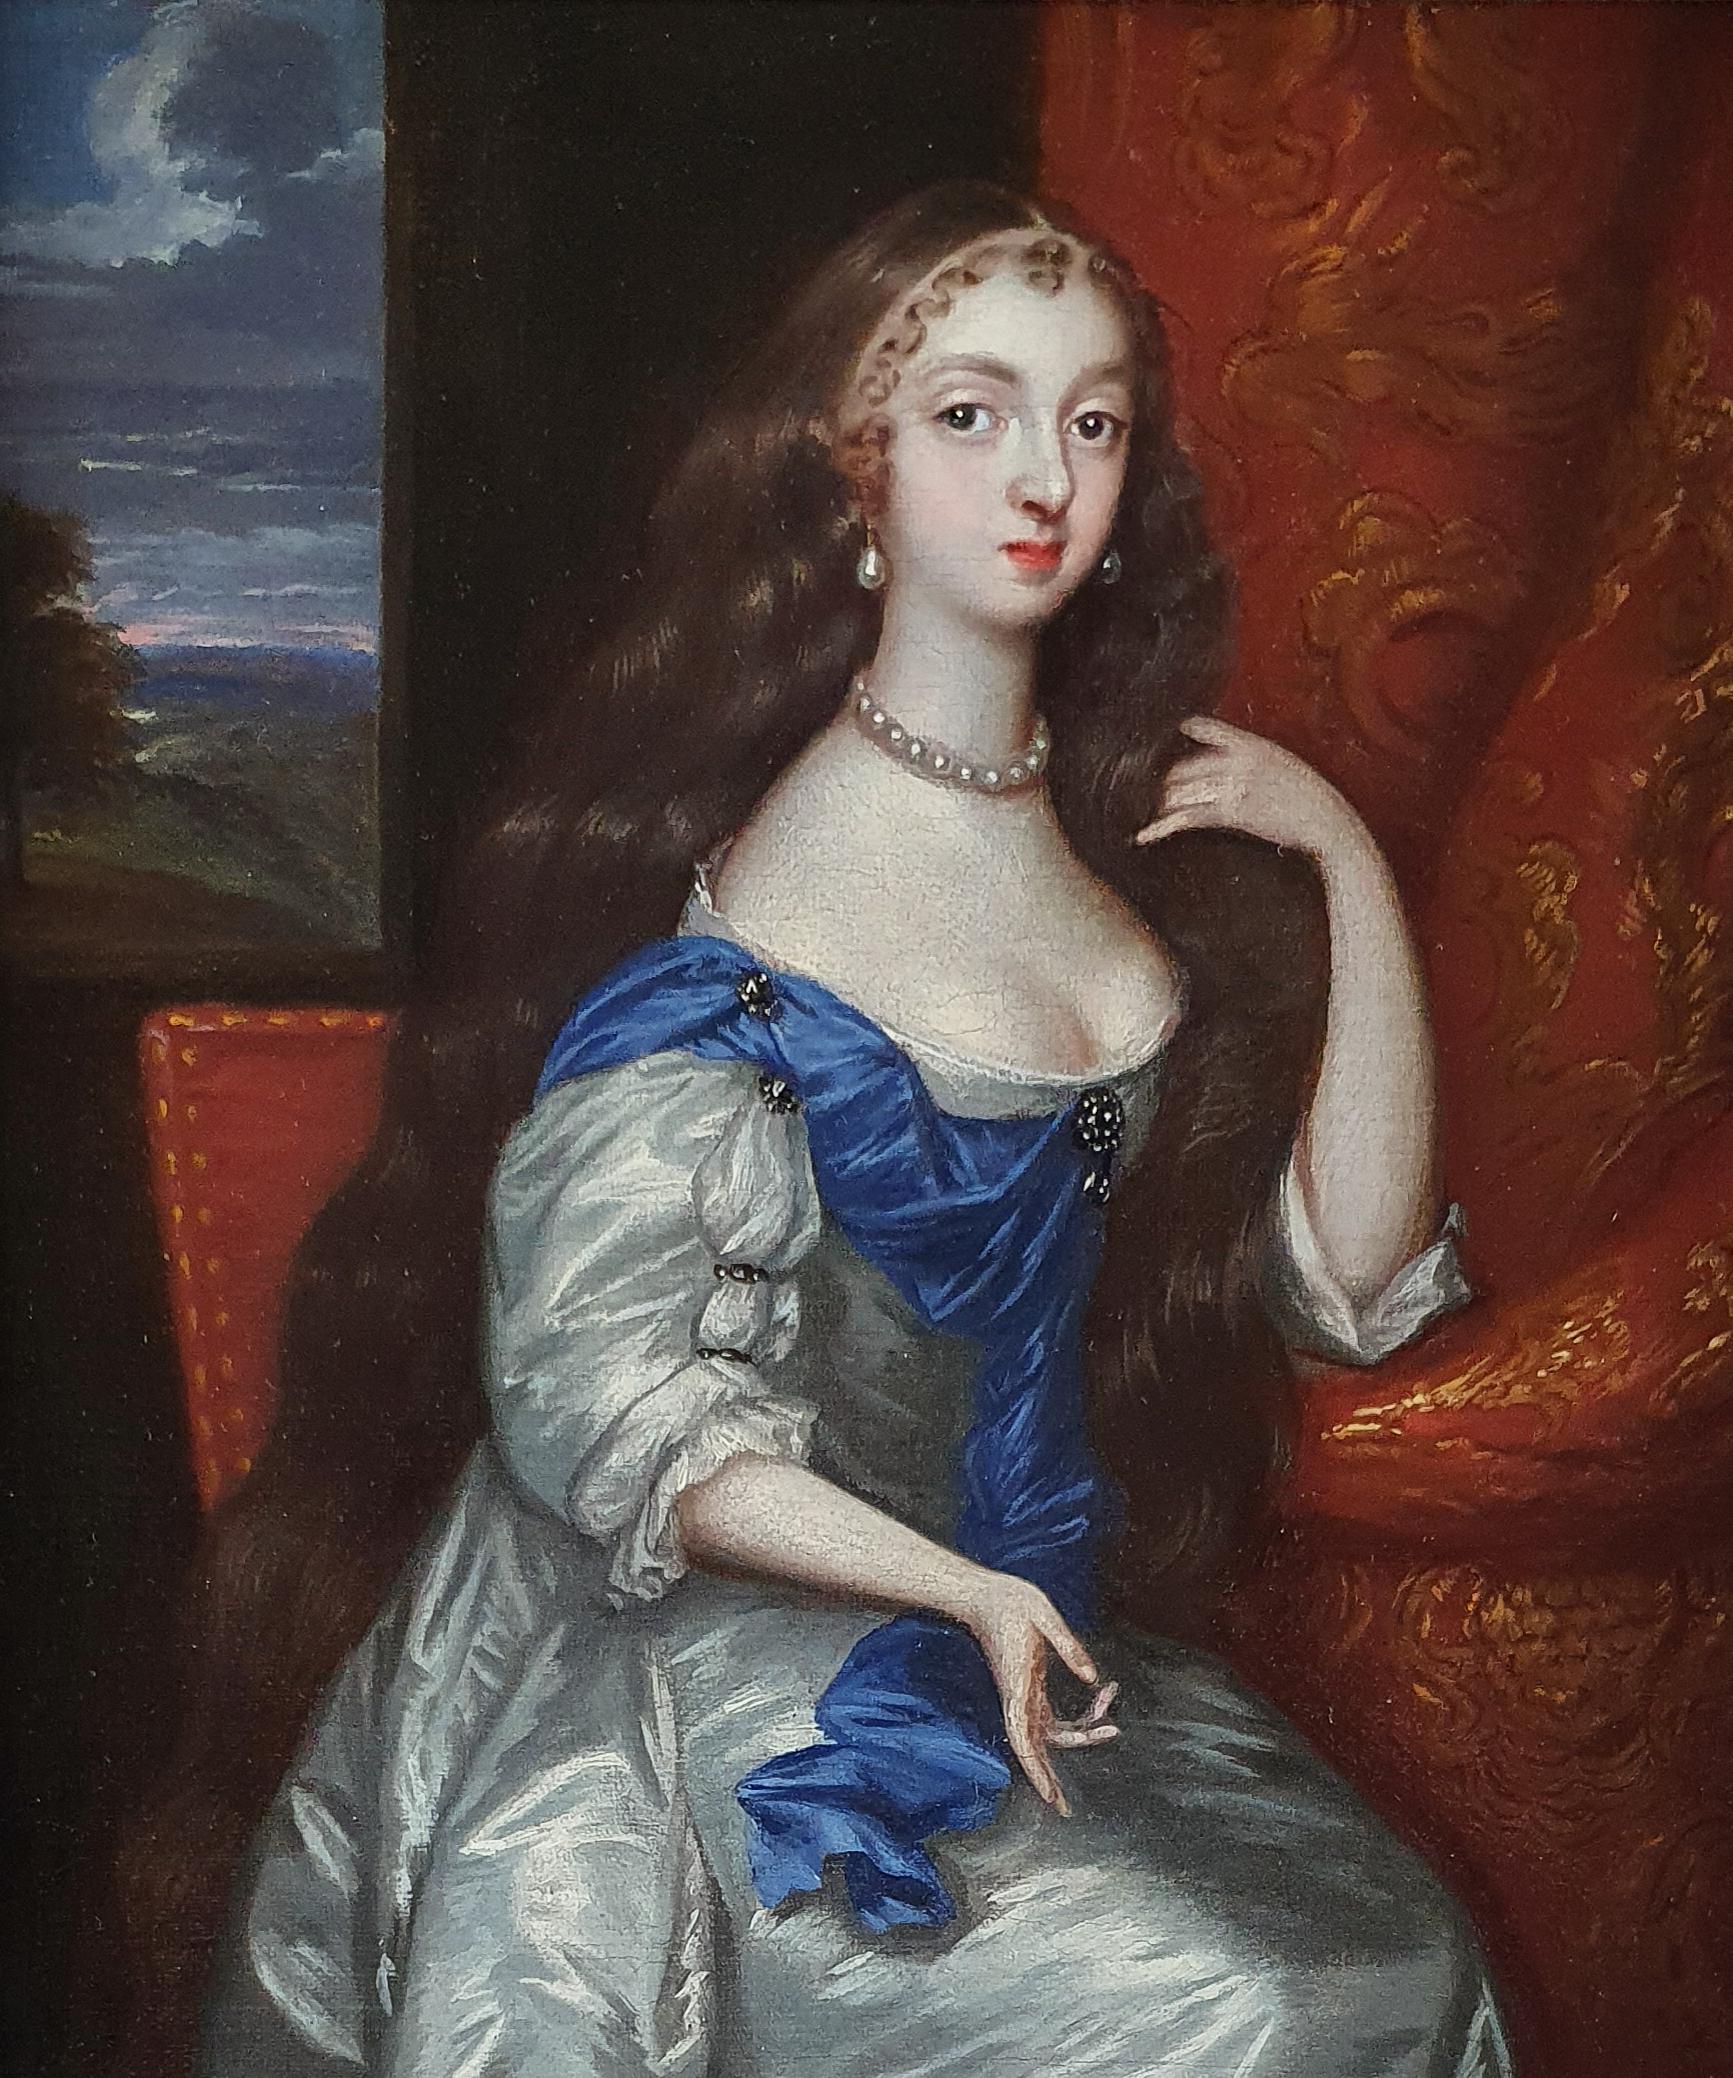 Portrait of a Lady in a white dress c.1700
Follower of Jacob Huysmans (c.1633–1696)

This charming work presented by Titan Fine Art formed part of a magnificent collection of paintings known as the Craven Collection of the Earls of Craven at their